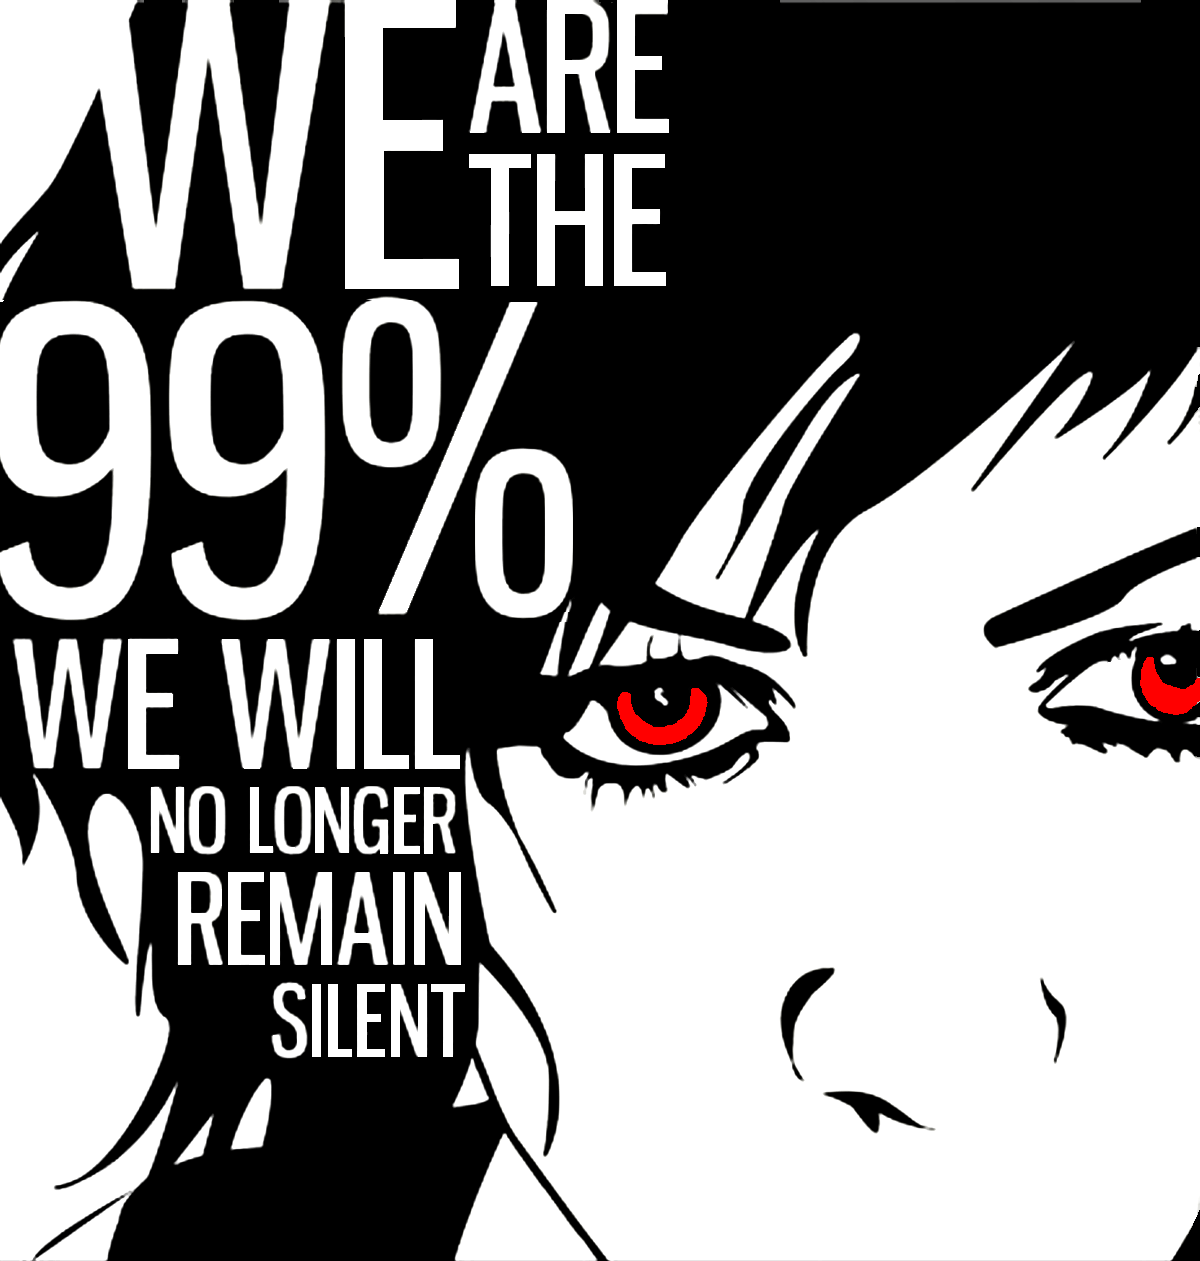 Occupy Wall Street. We are the 99%. We will no longer remain silent. Converted to black-white gif by Andy Chalkley